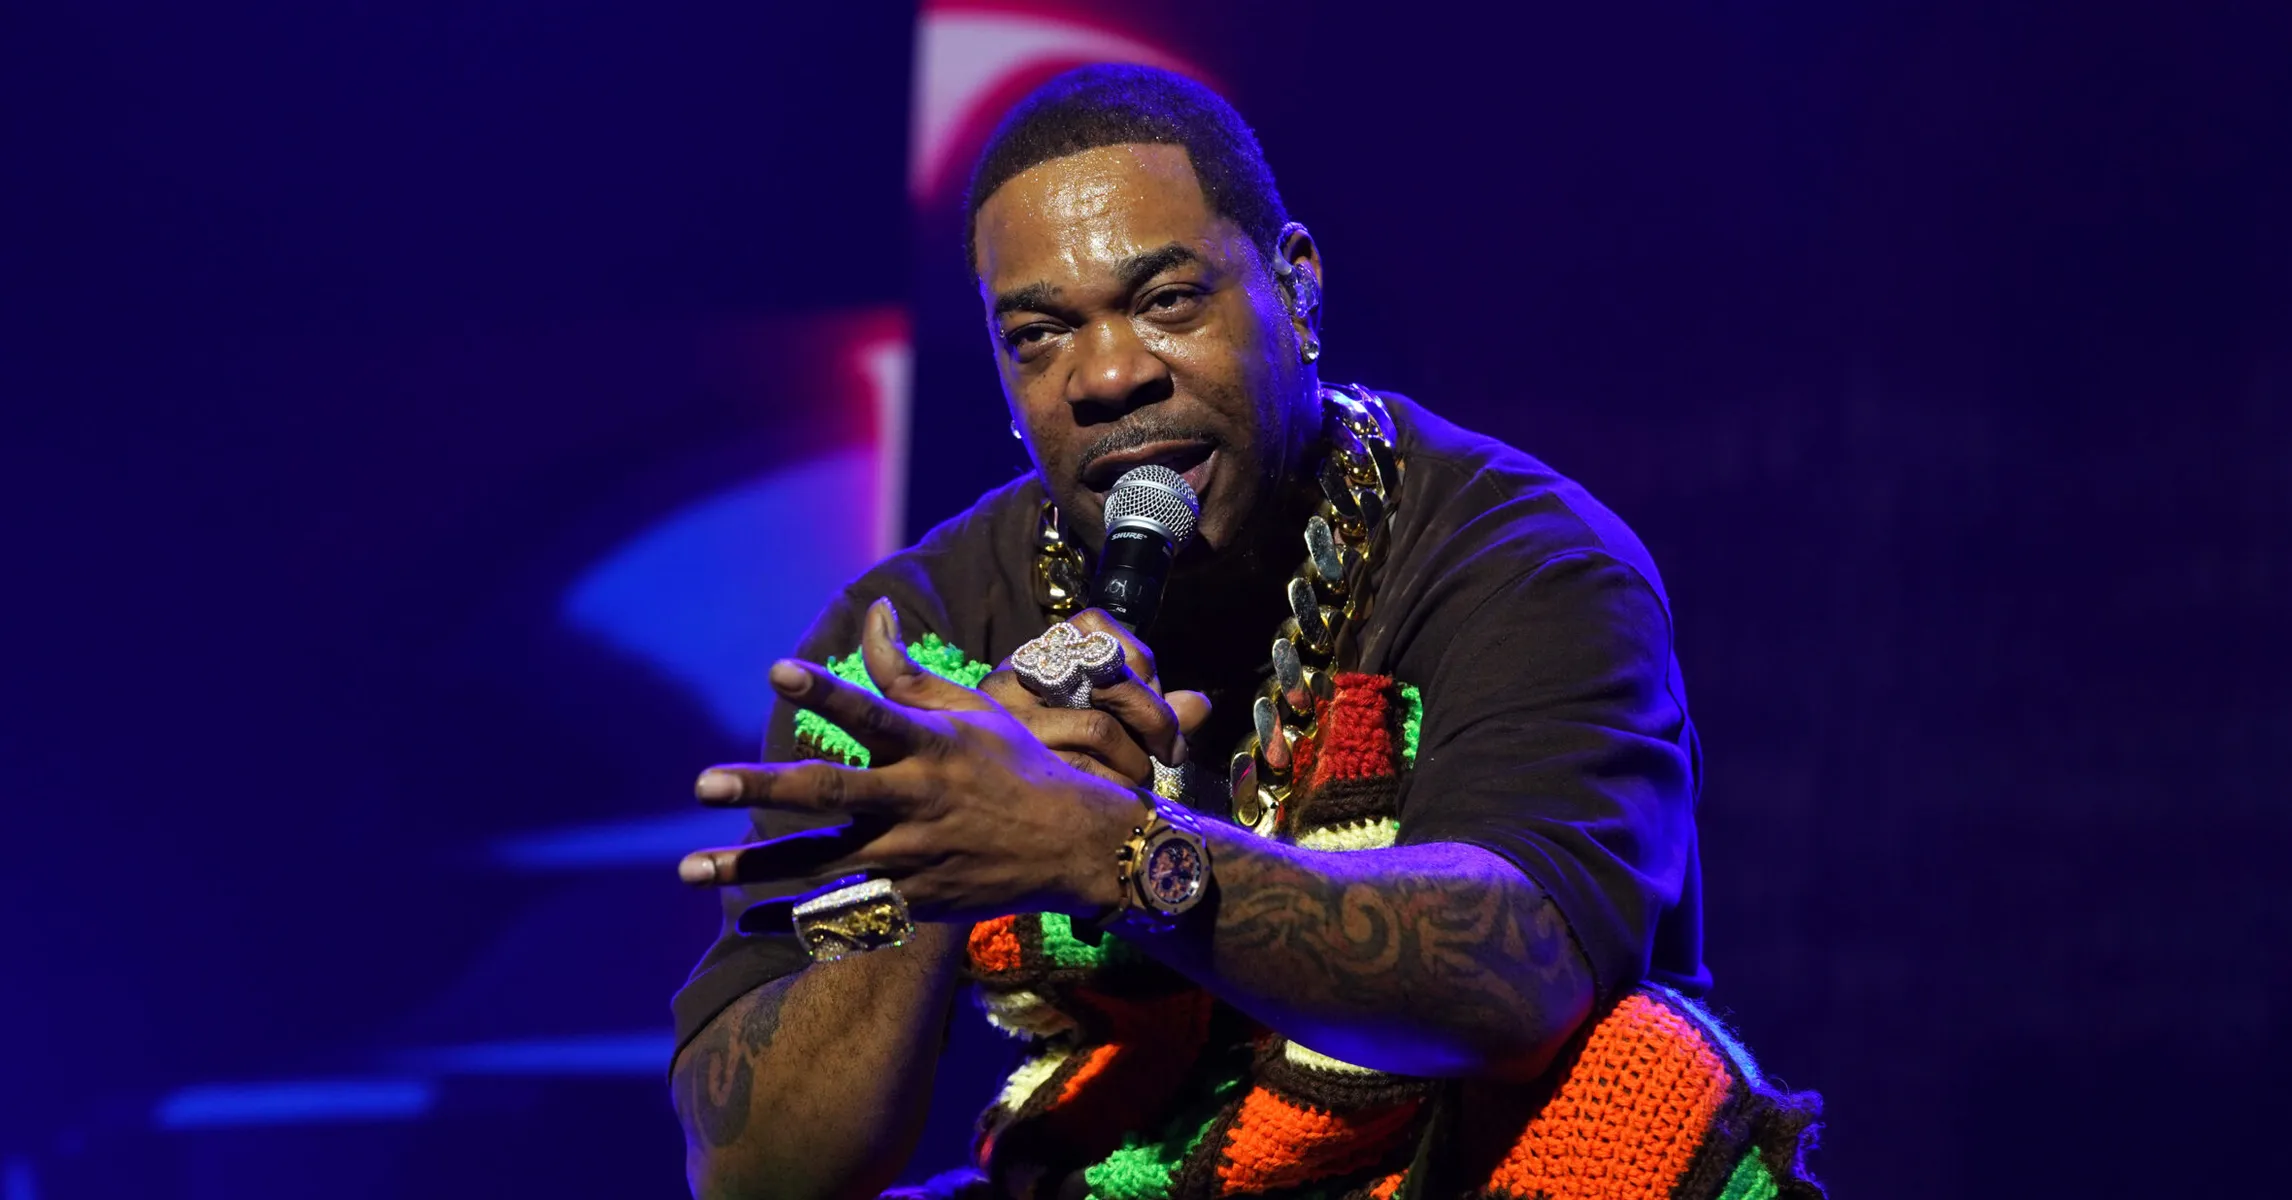 Busta Rhymes – The most important songs